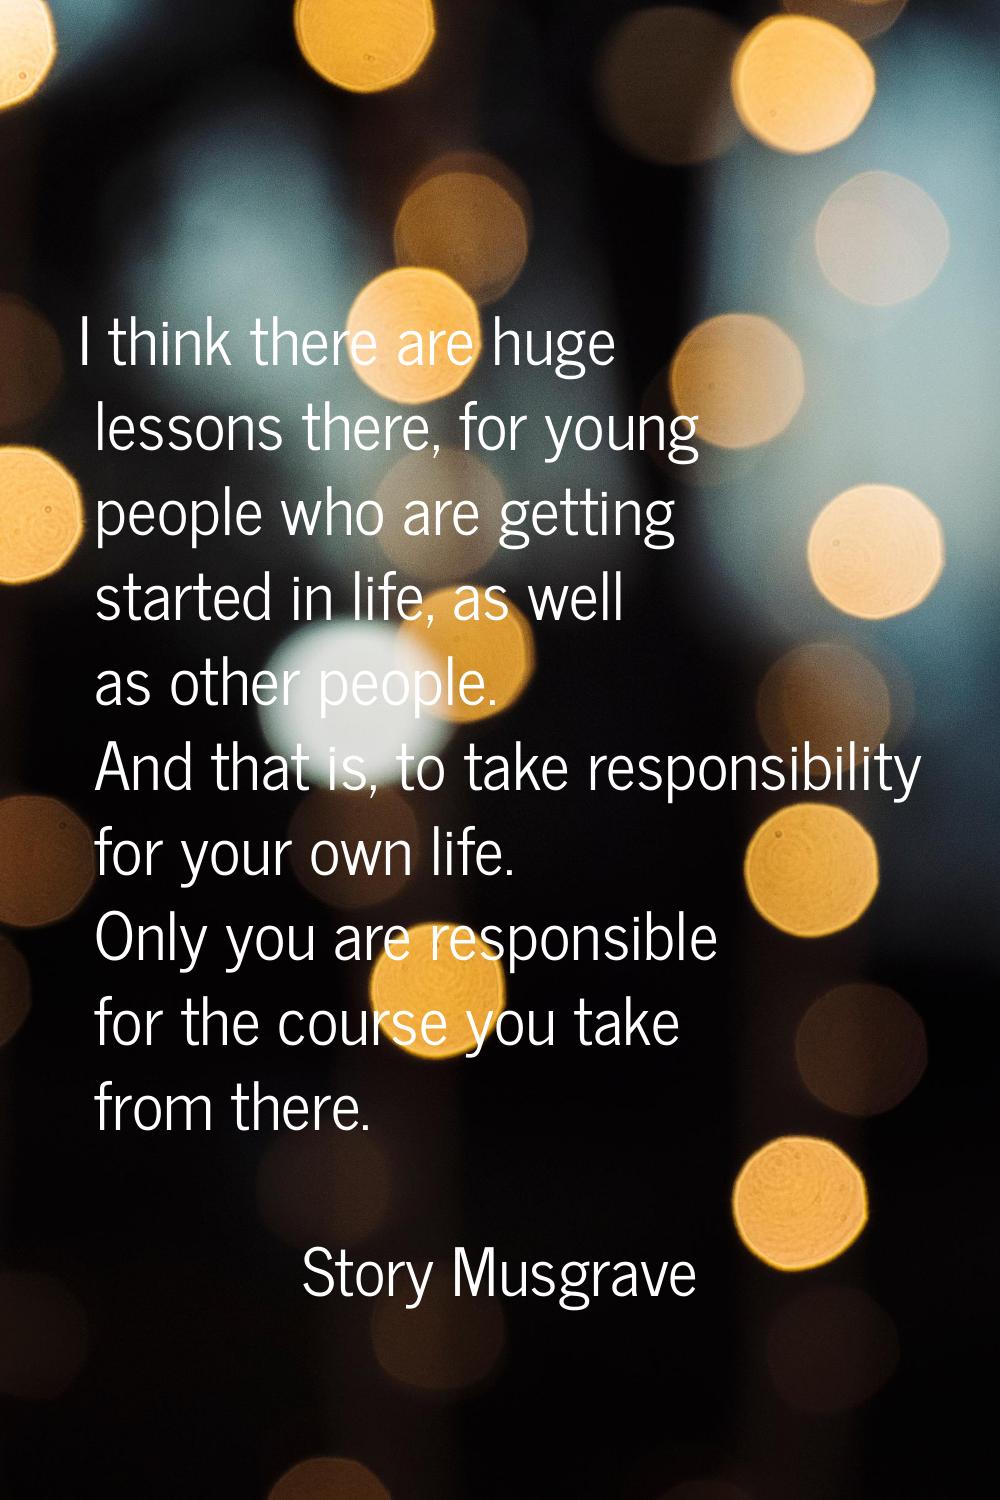 I think there are huge lessons there, for young people who are getting started in life, as well as 